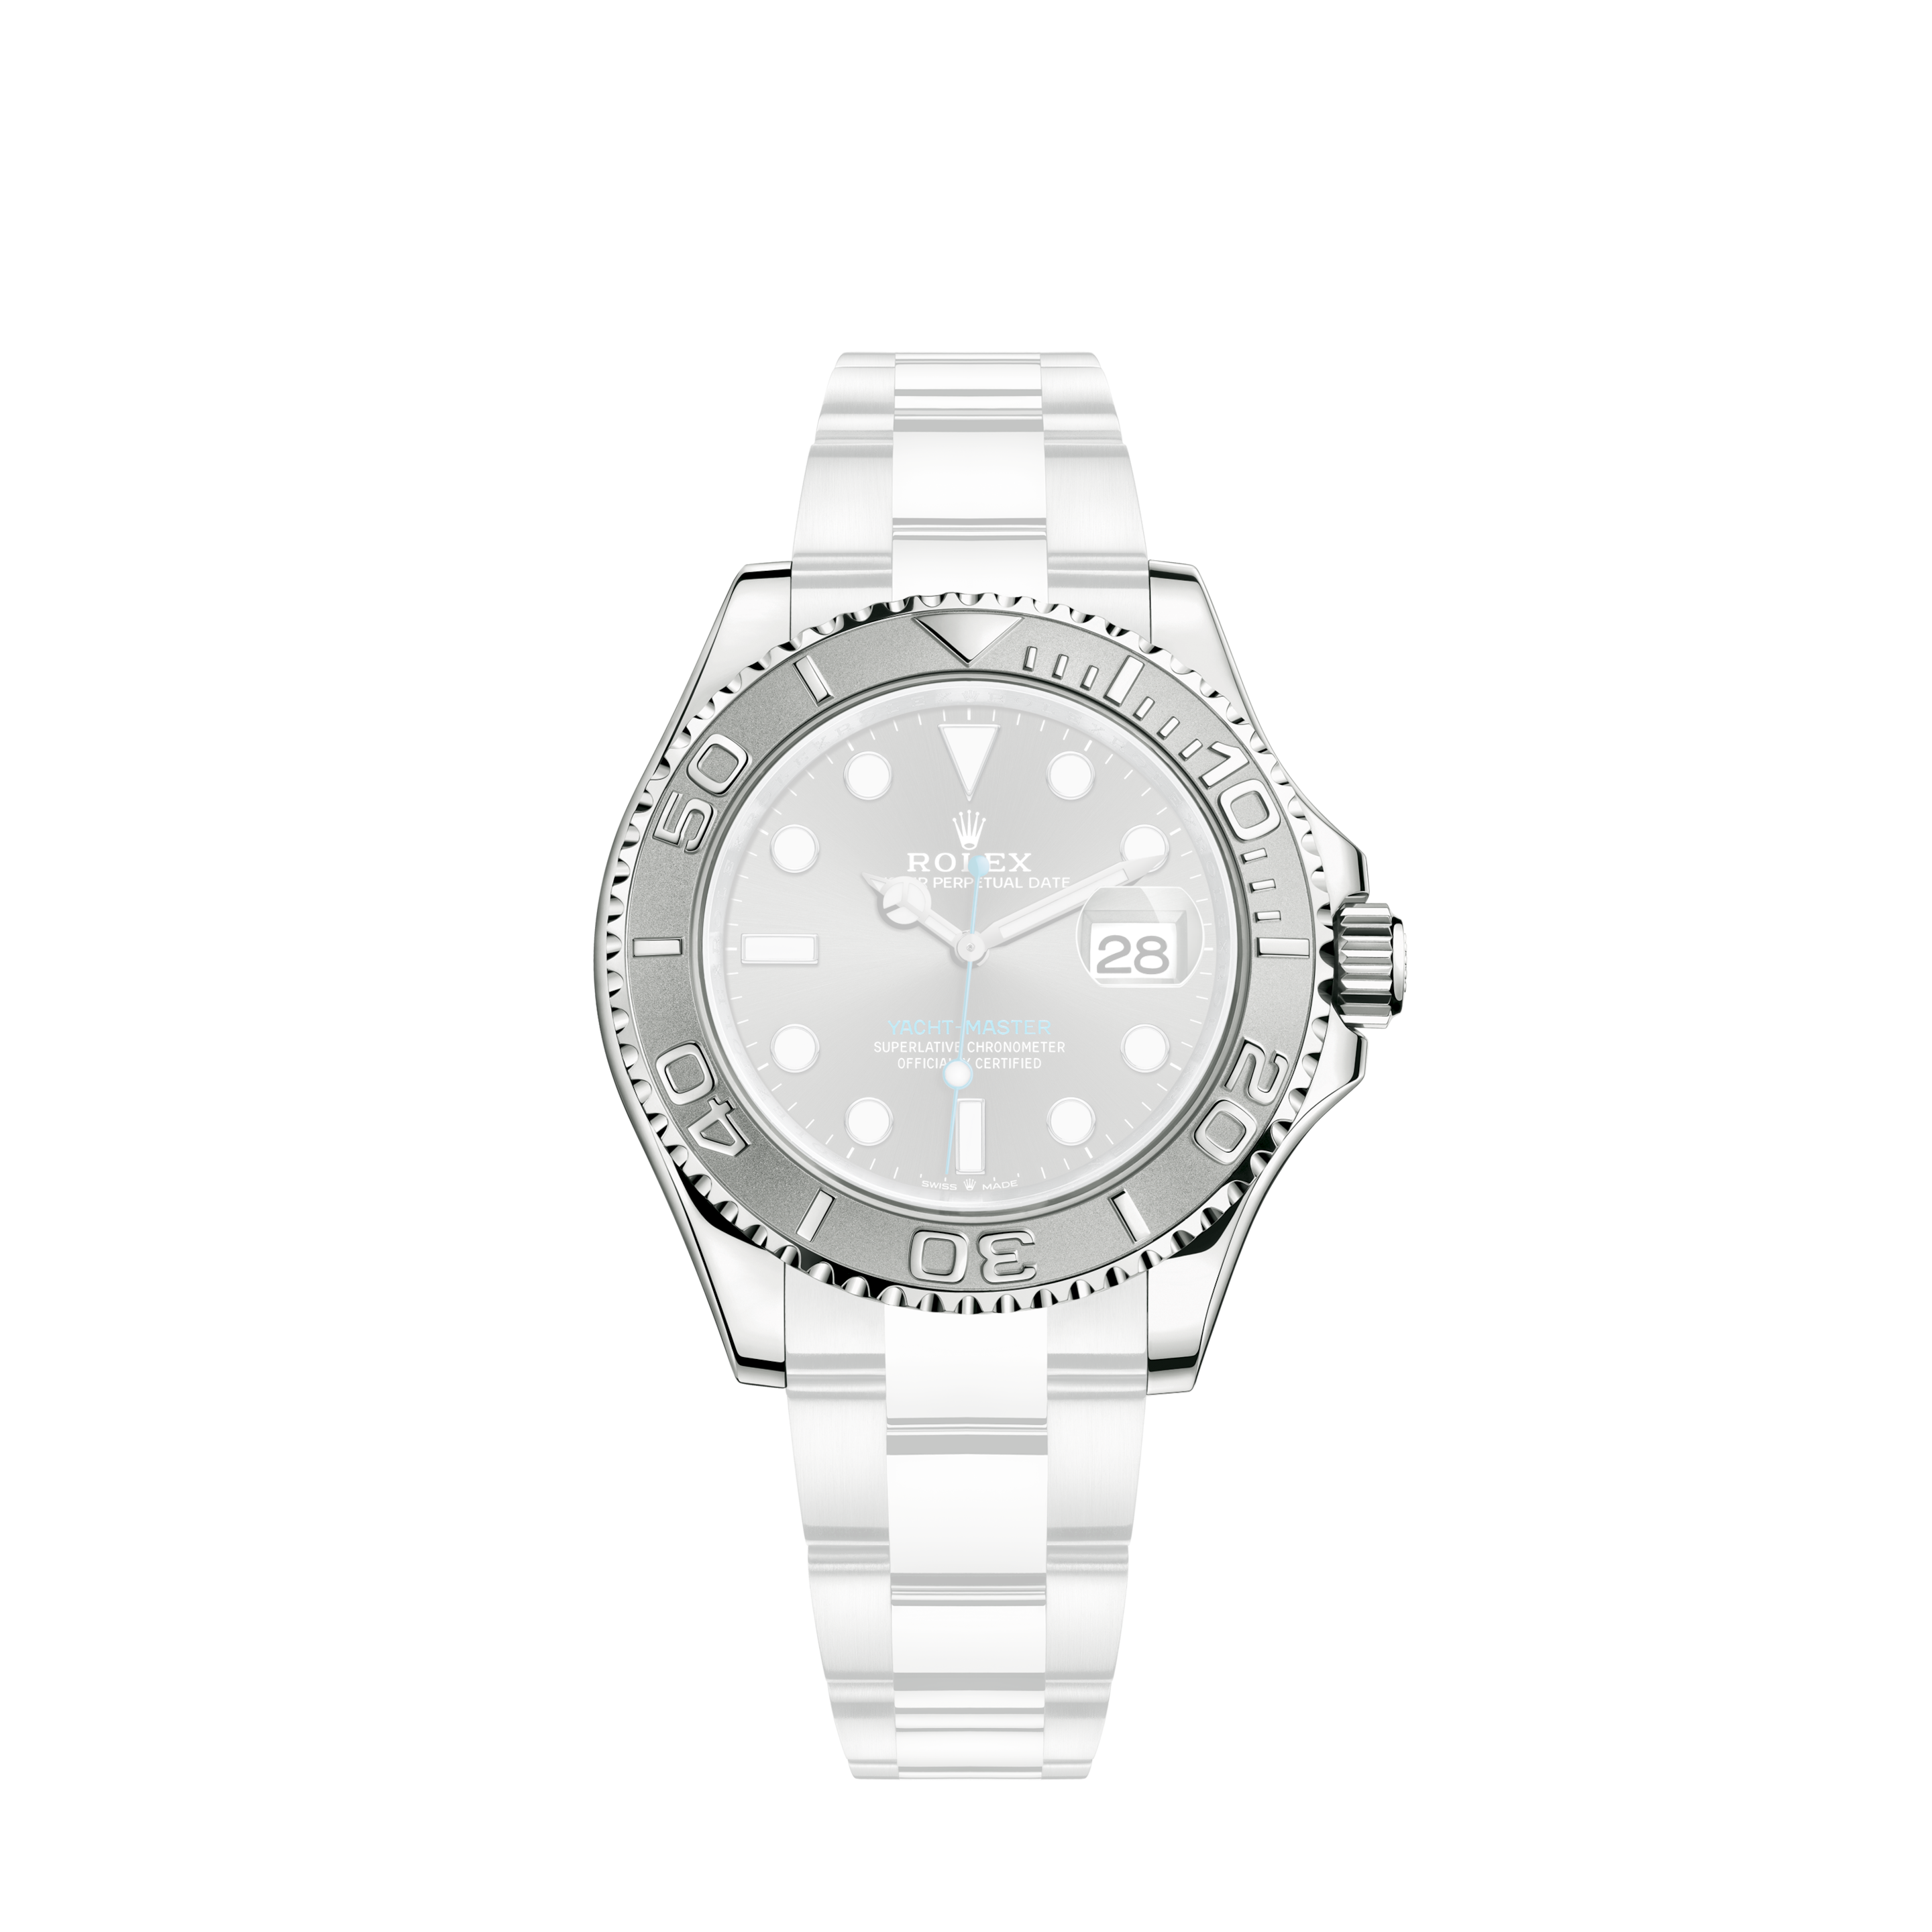 Rolex Oyster Perpetual 36mm Datejust Diamond Bezel White Mother Of Pearl Dial with Diamond 6 & 9 NumbersRolex Oyster Perpetual 36mm Datejust Diamond Bezel White Mother Of Pearl Dial with Diamond 6 & 9 Numbers 16233